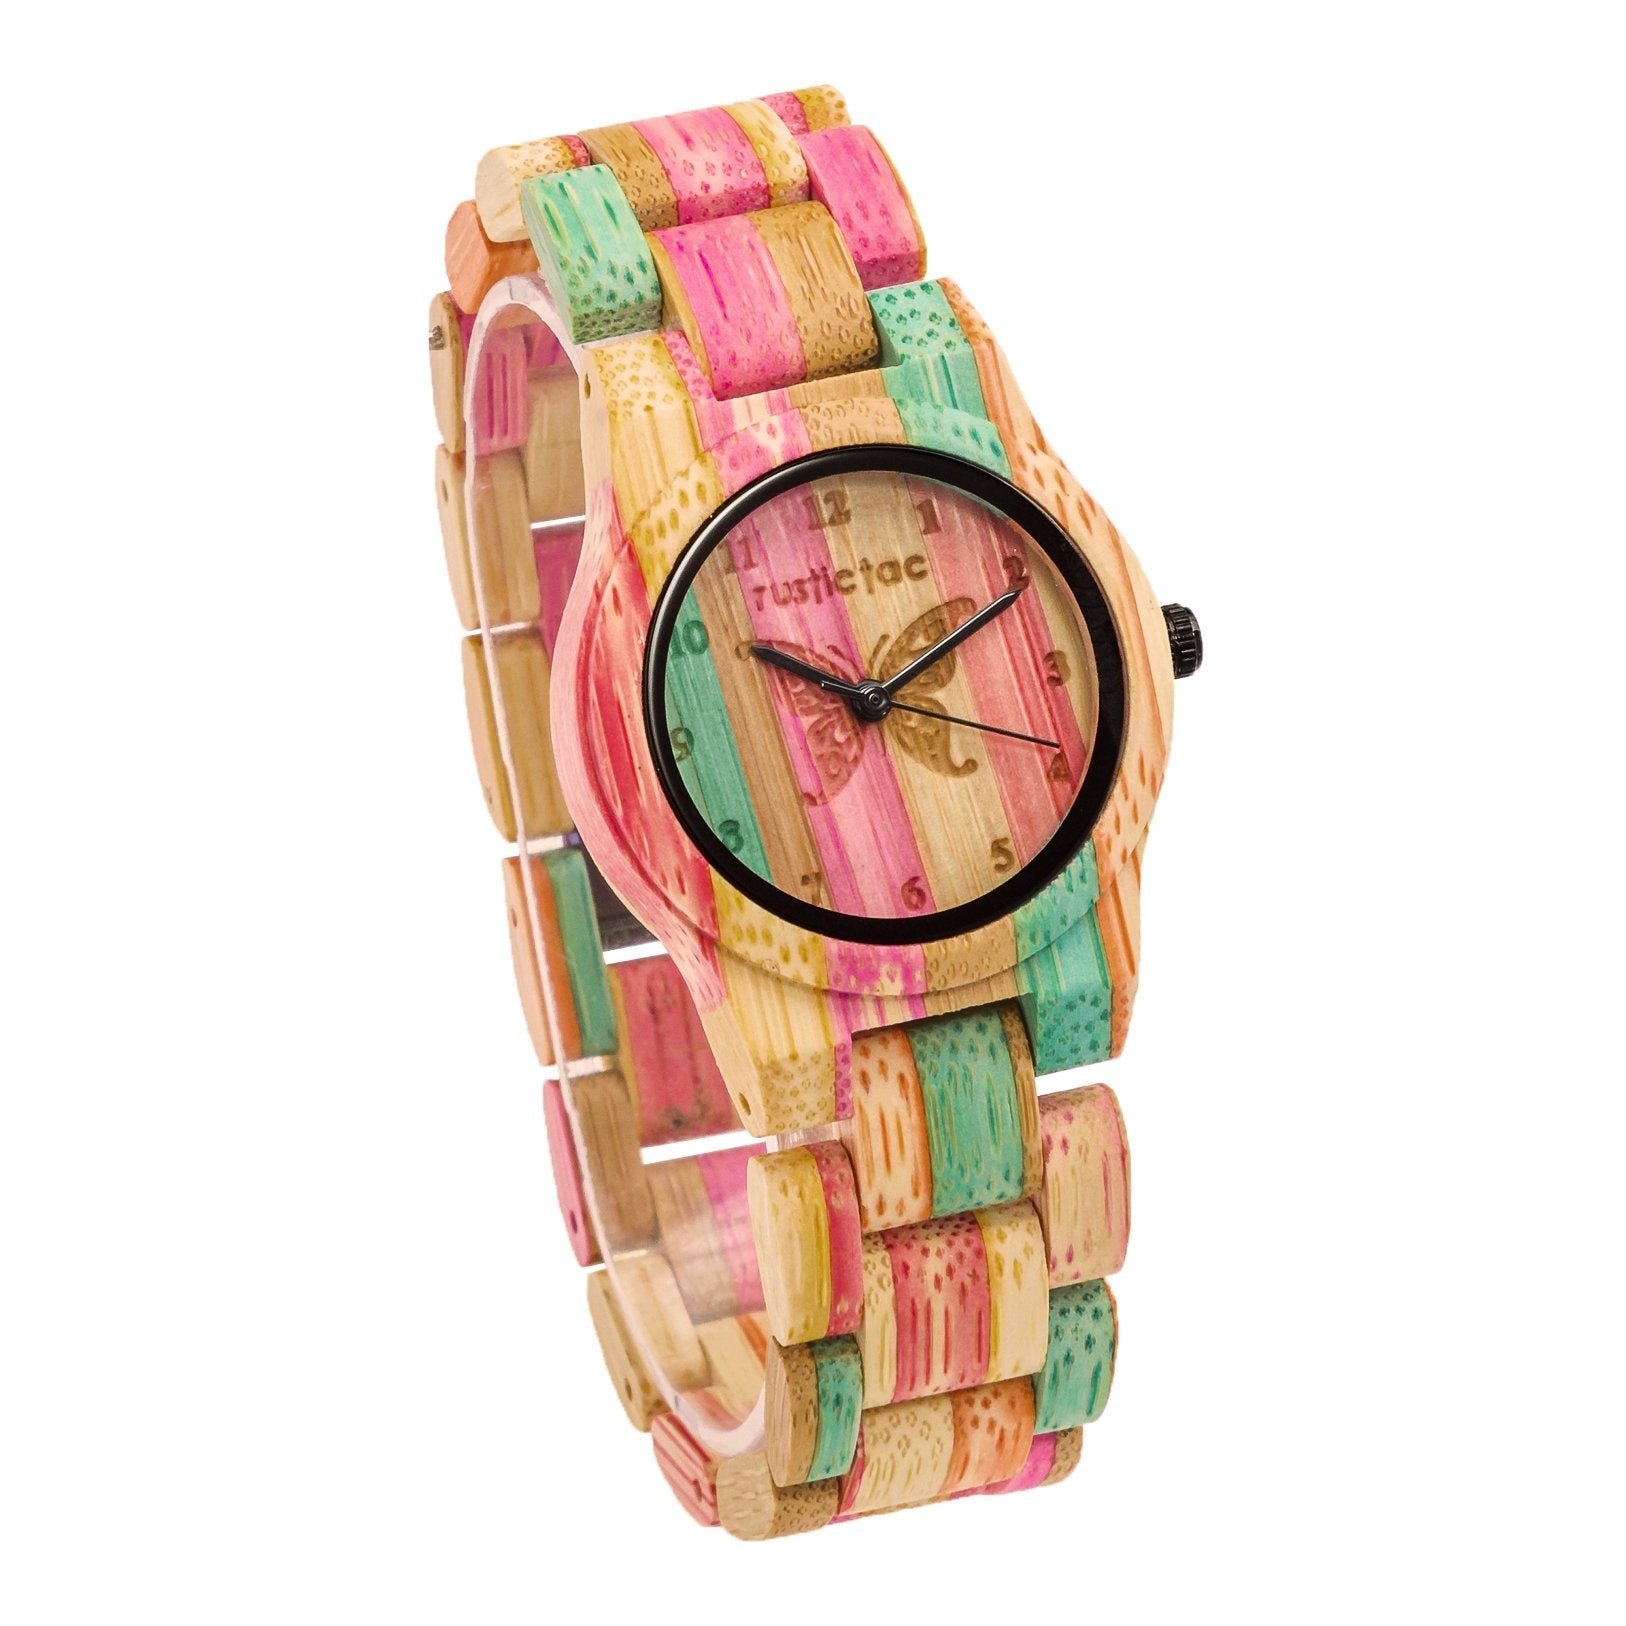 Watches for Women with Multicolour Rainbow Pattern, Quirky Boho Hippie  Watch, Gifts for Her Women Girl, Bohemian Rainbow Jewelry, PU Leather Woven  Strap 